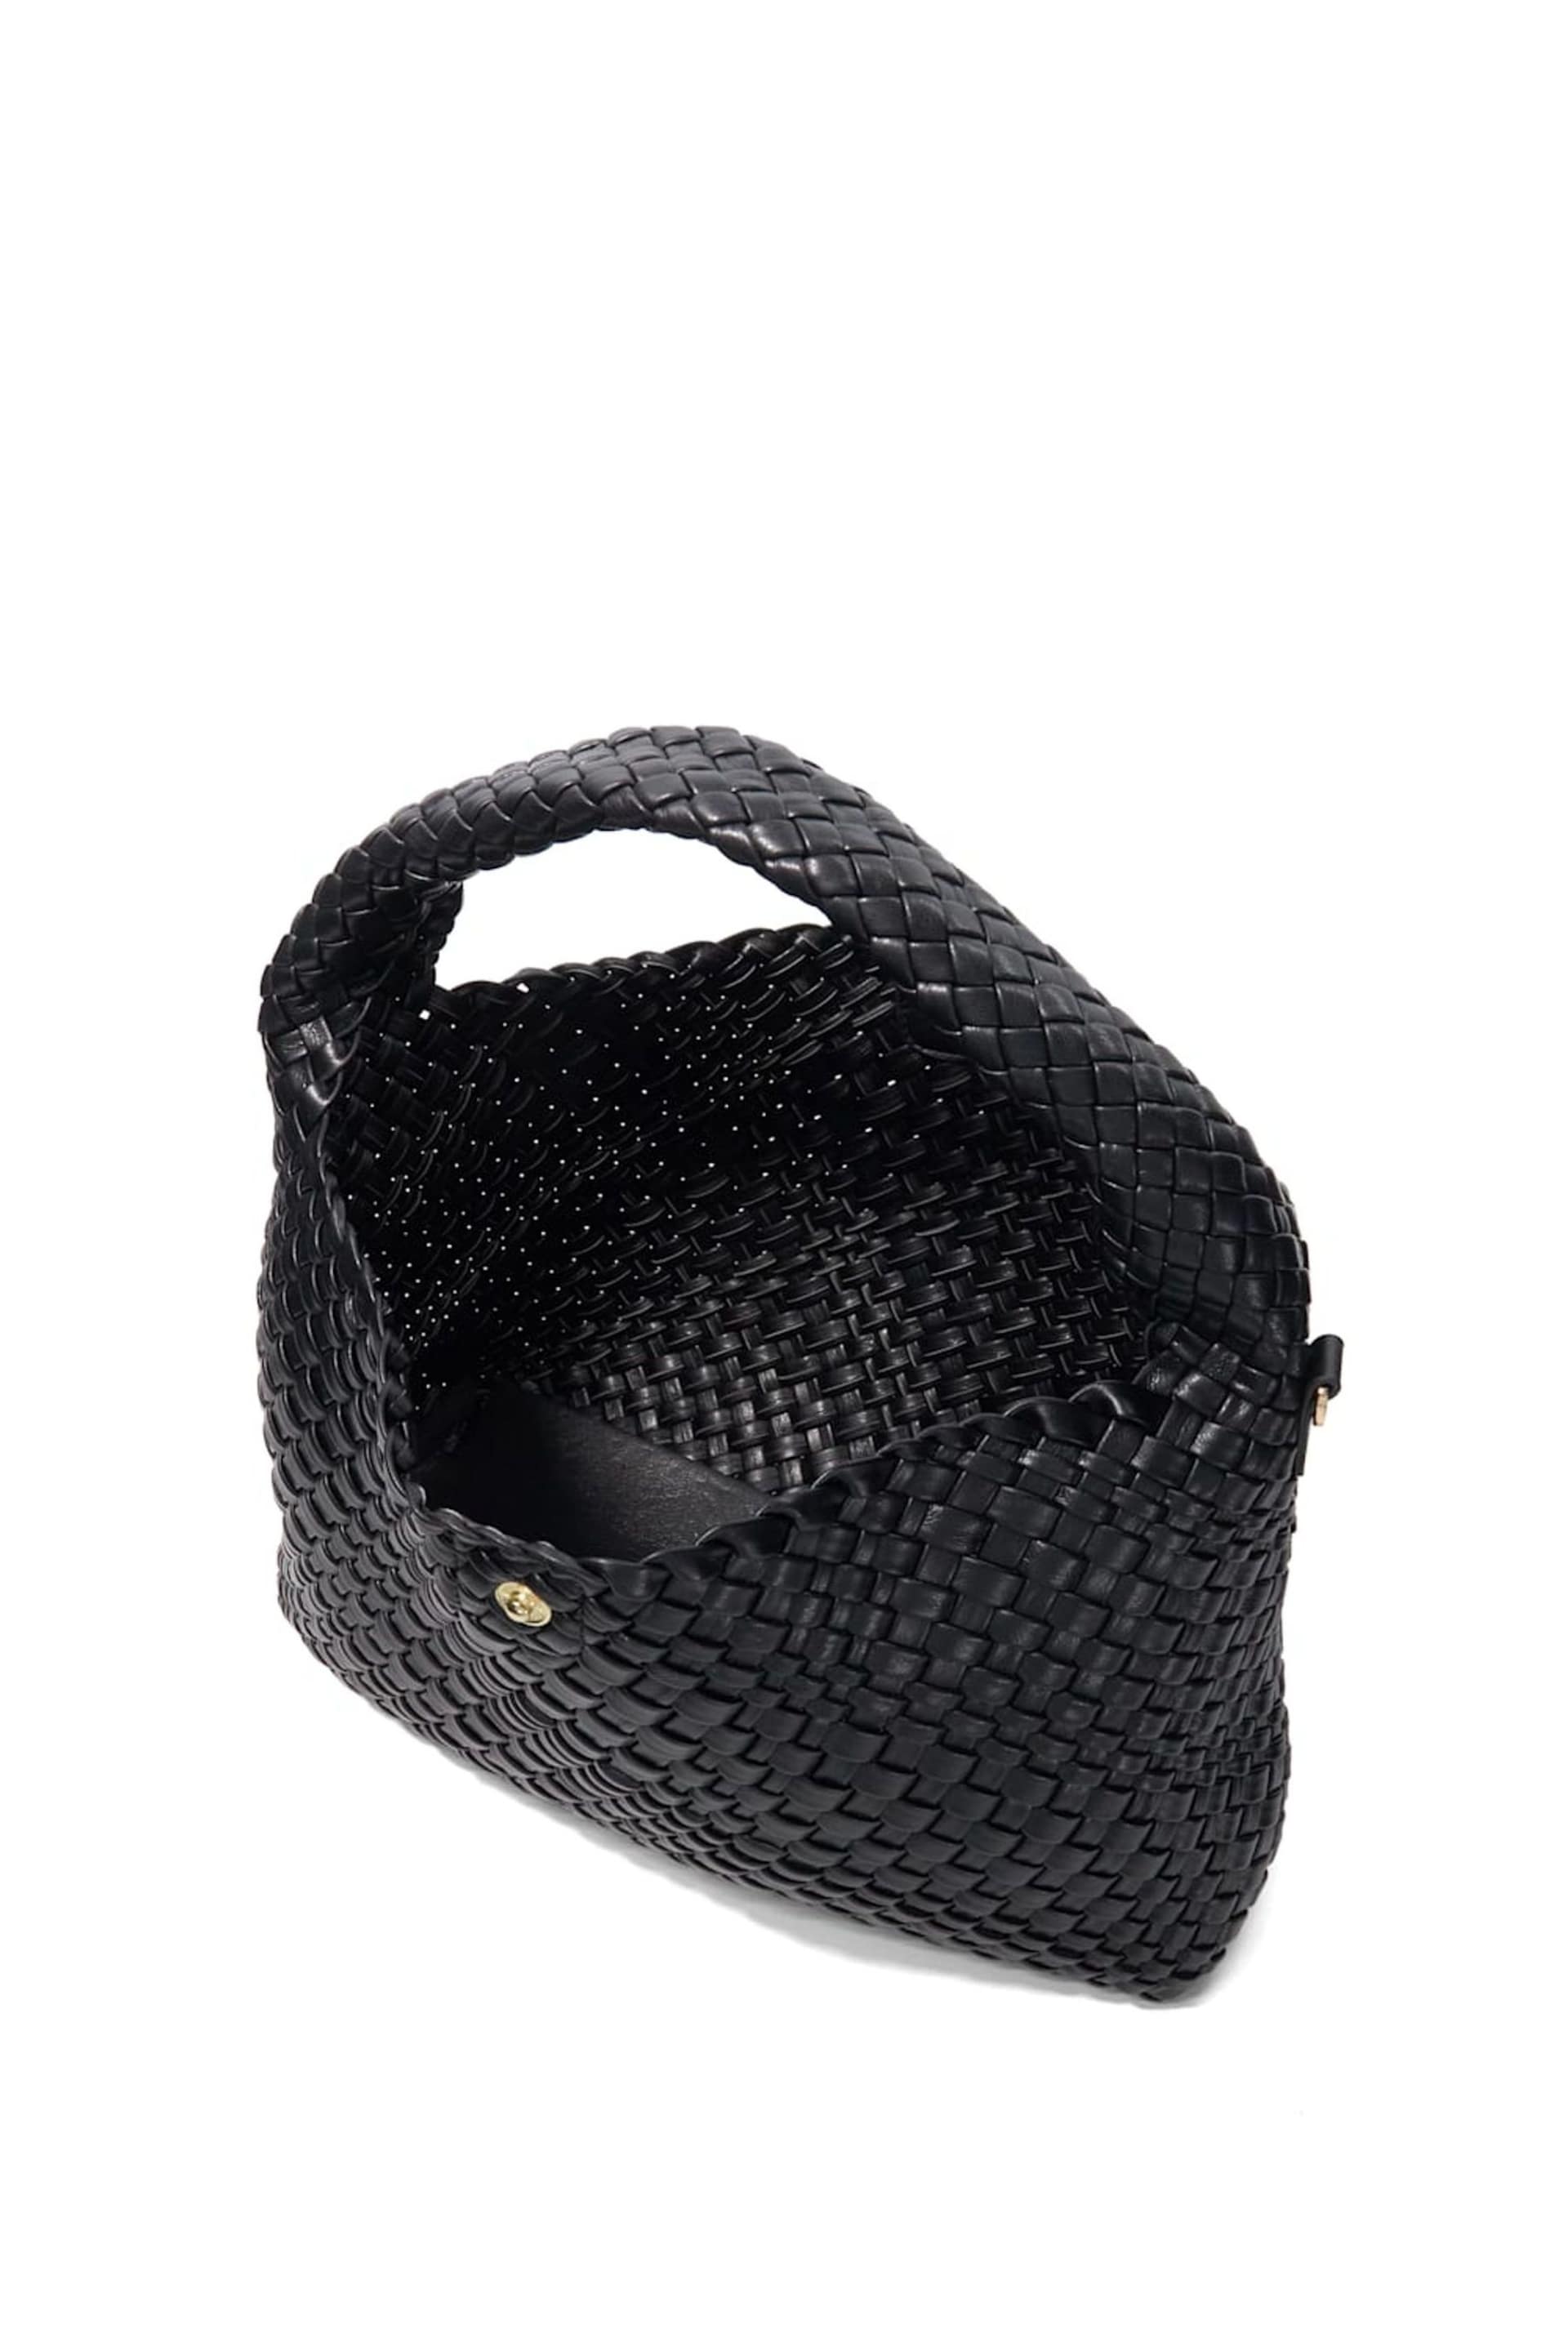 Dune London Black Large Deliberate Woven Slouch Bag - Image 5 of 7